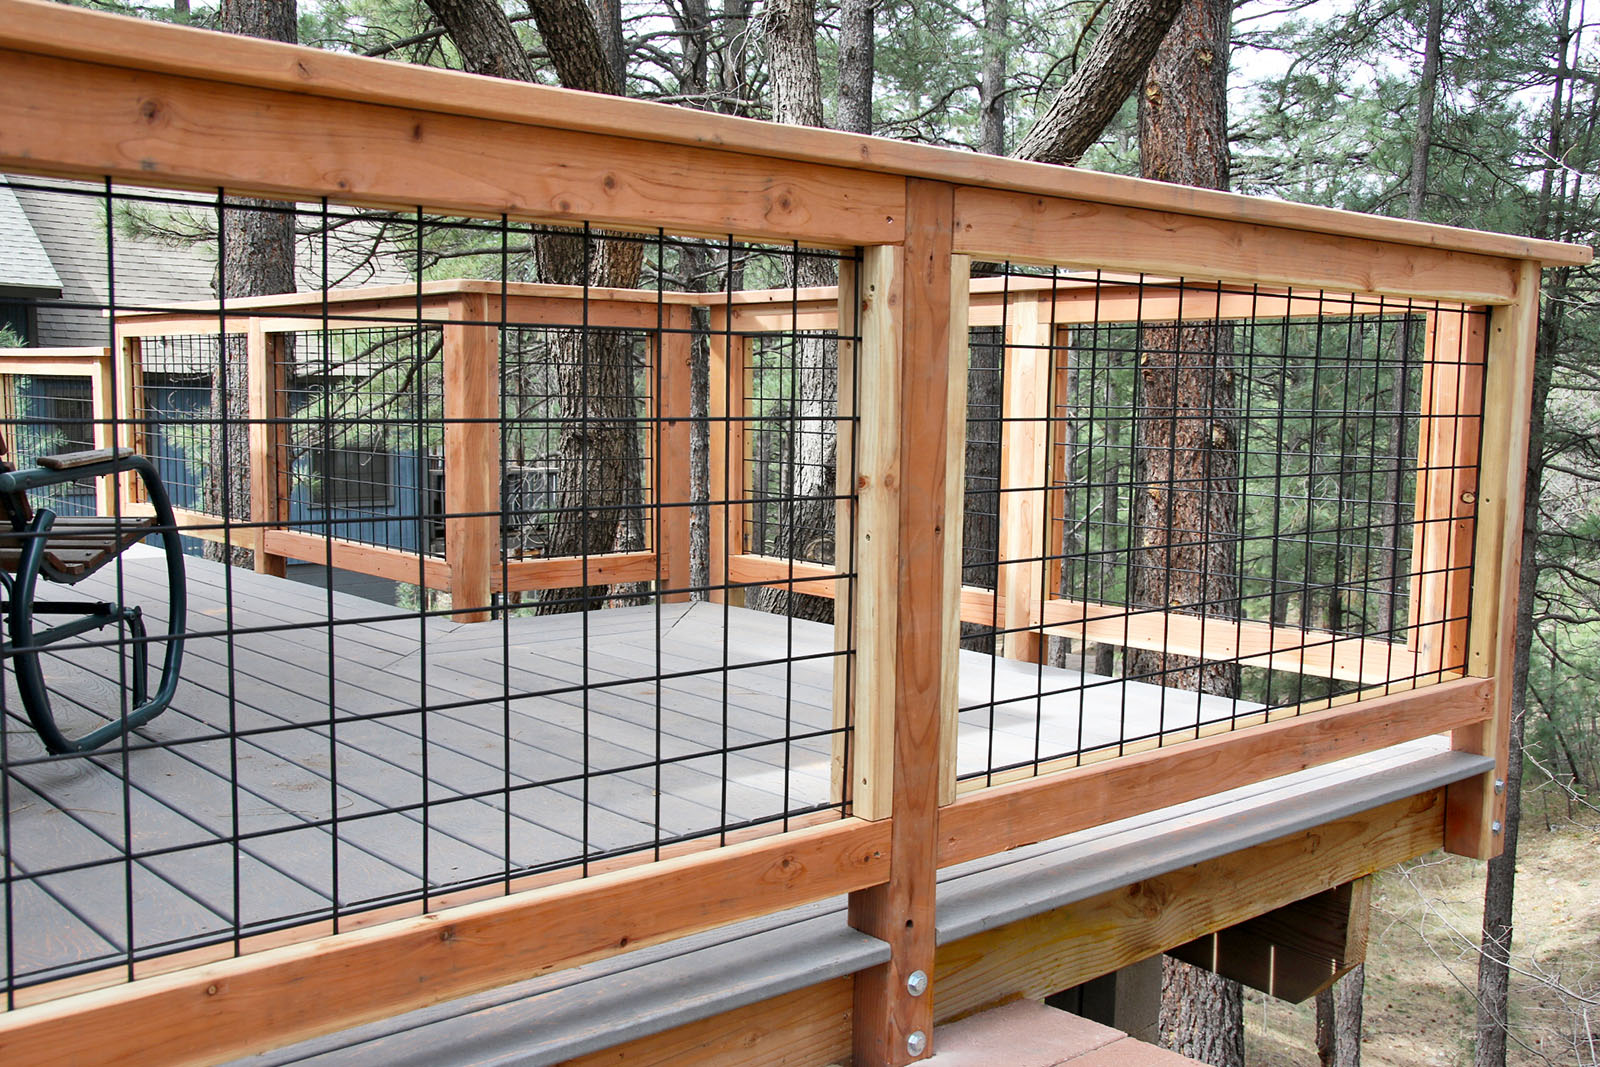 Wild Hog brand metal deck railing installed on a deck in Kachina Village near Flagstaff Arizona.  The railing consists of black painted welded wire on a 4 inch by 4 inch grid.